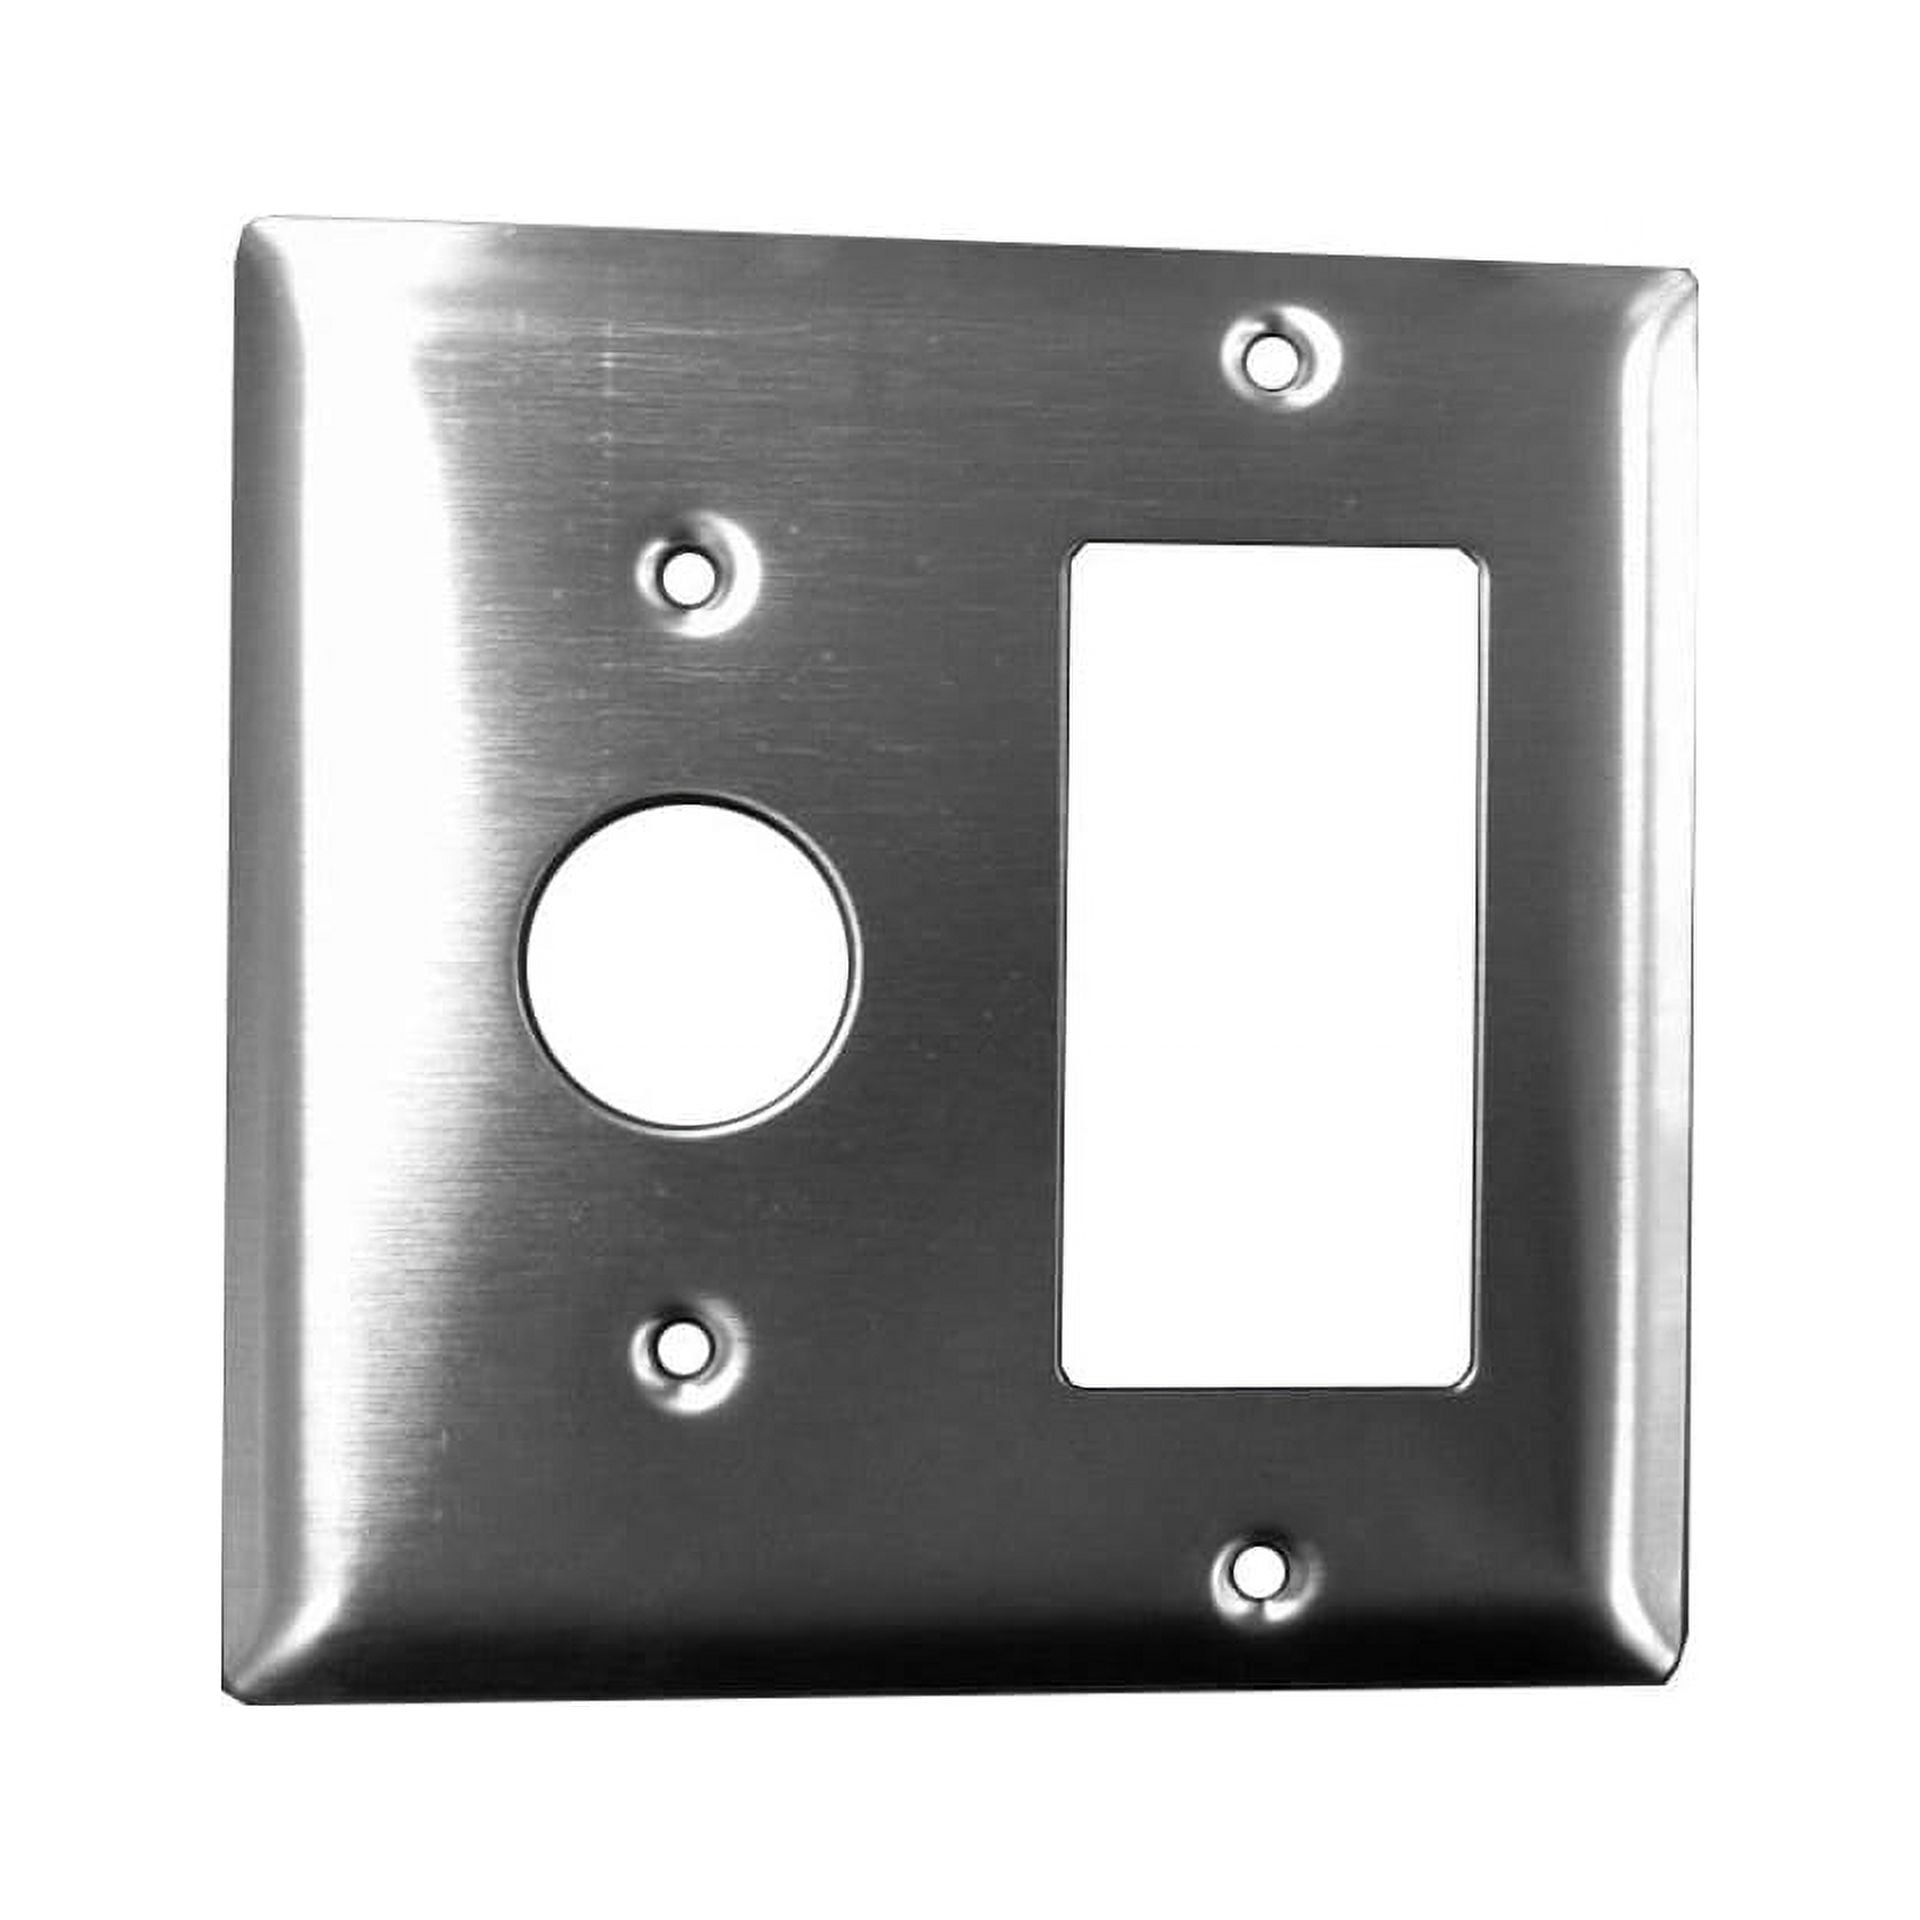 Picture of Amba AJ-DGP-P Radiant Square Double Gang Plate - Polished